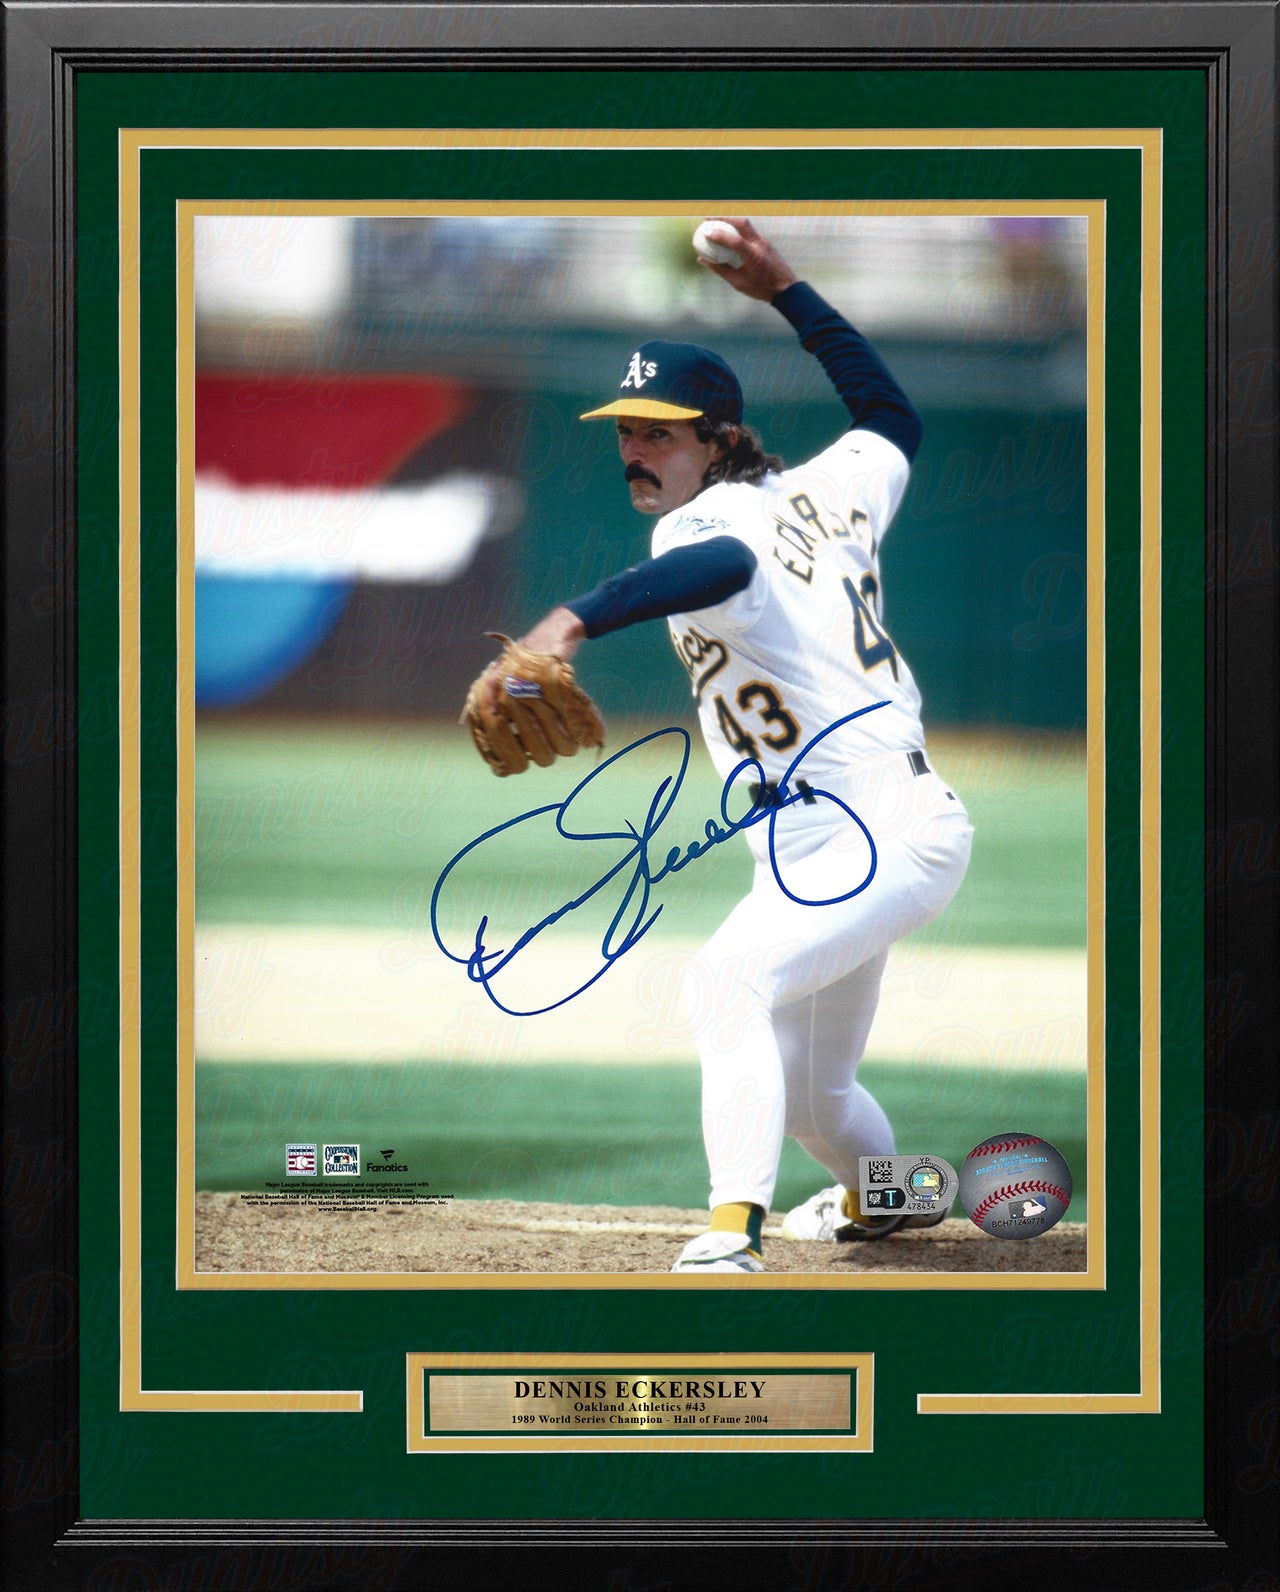 Dennis Eckersley in Action Oakland Athletics Autographed 11" x 14" Framed Baseball Photo - Dynasty Sports & Framing 